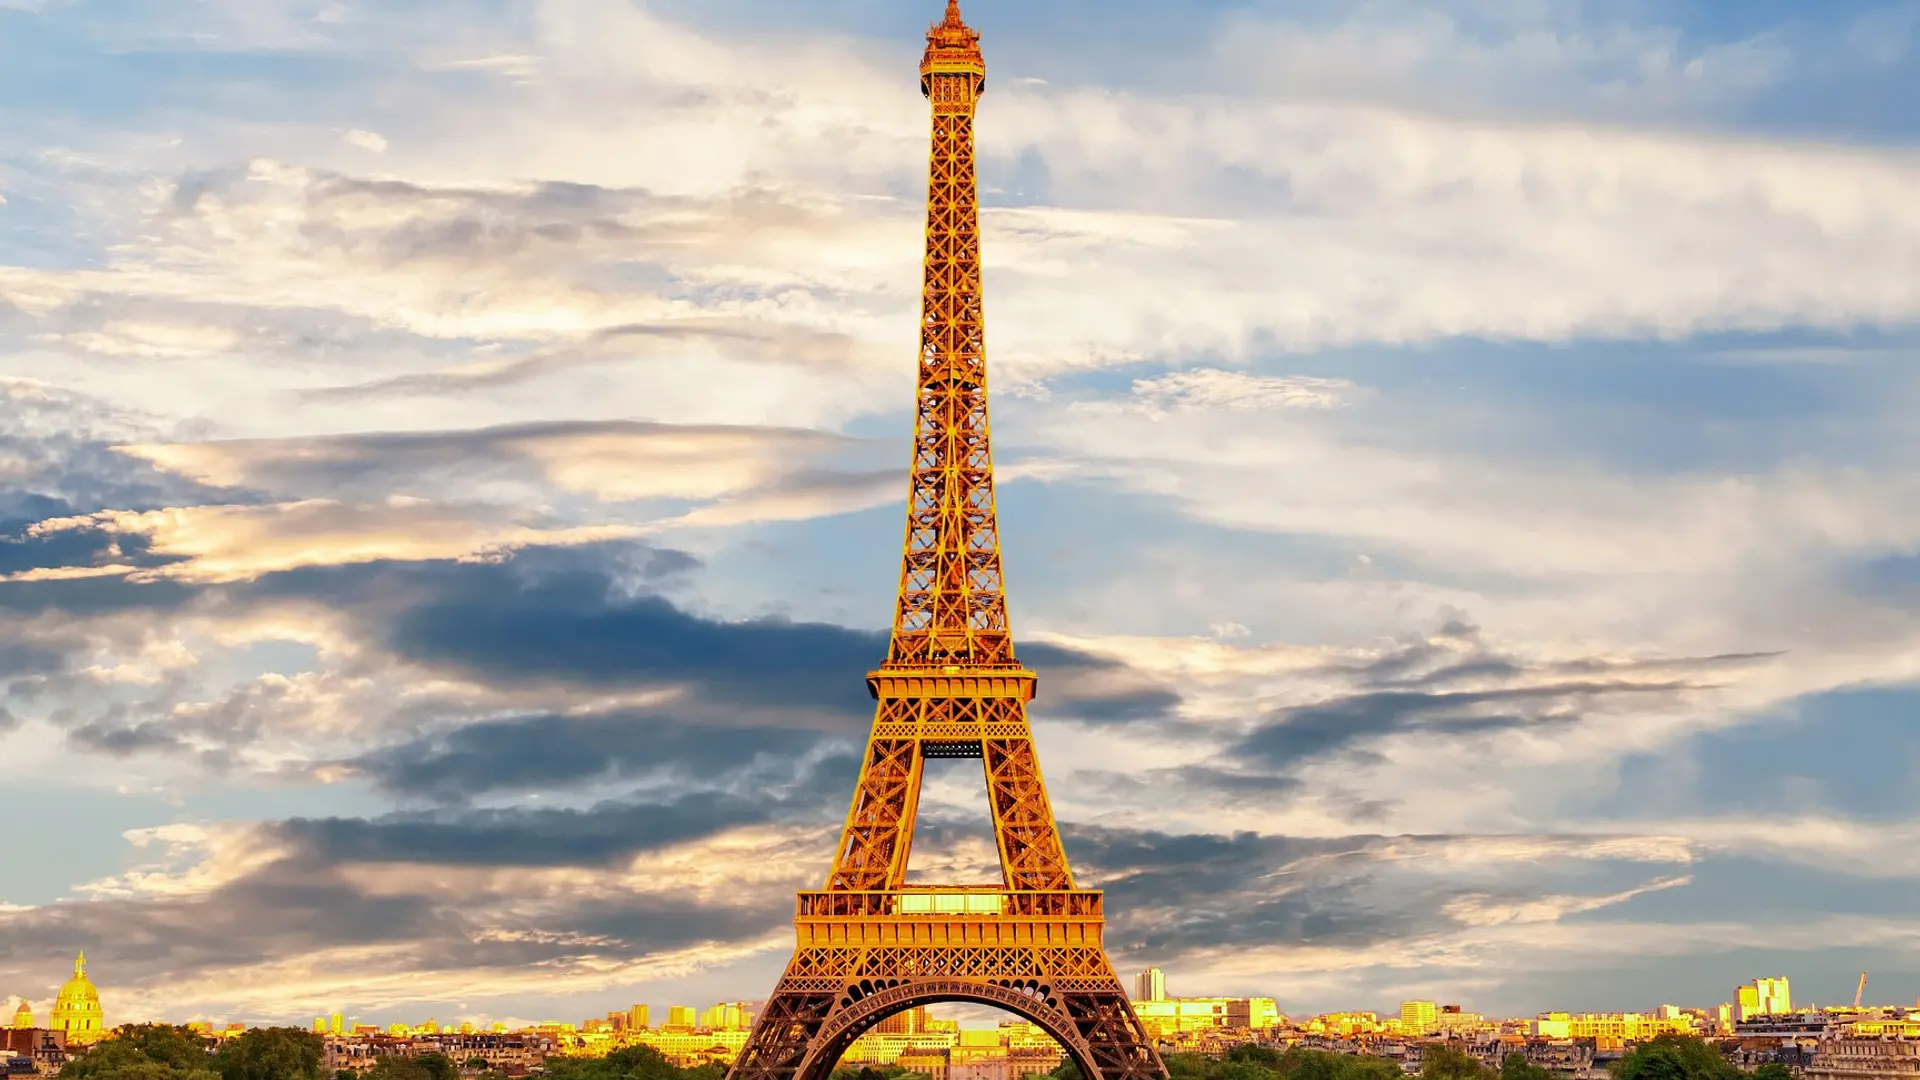 the eiffel tower seen at day